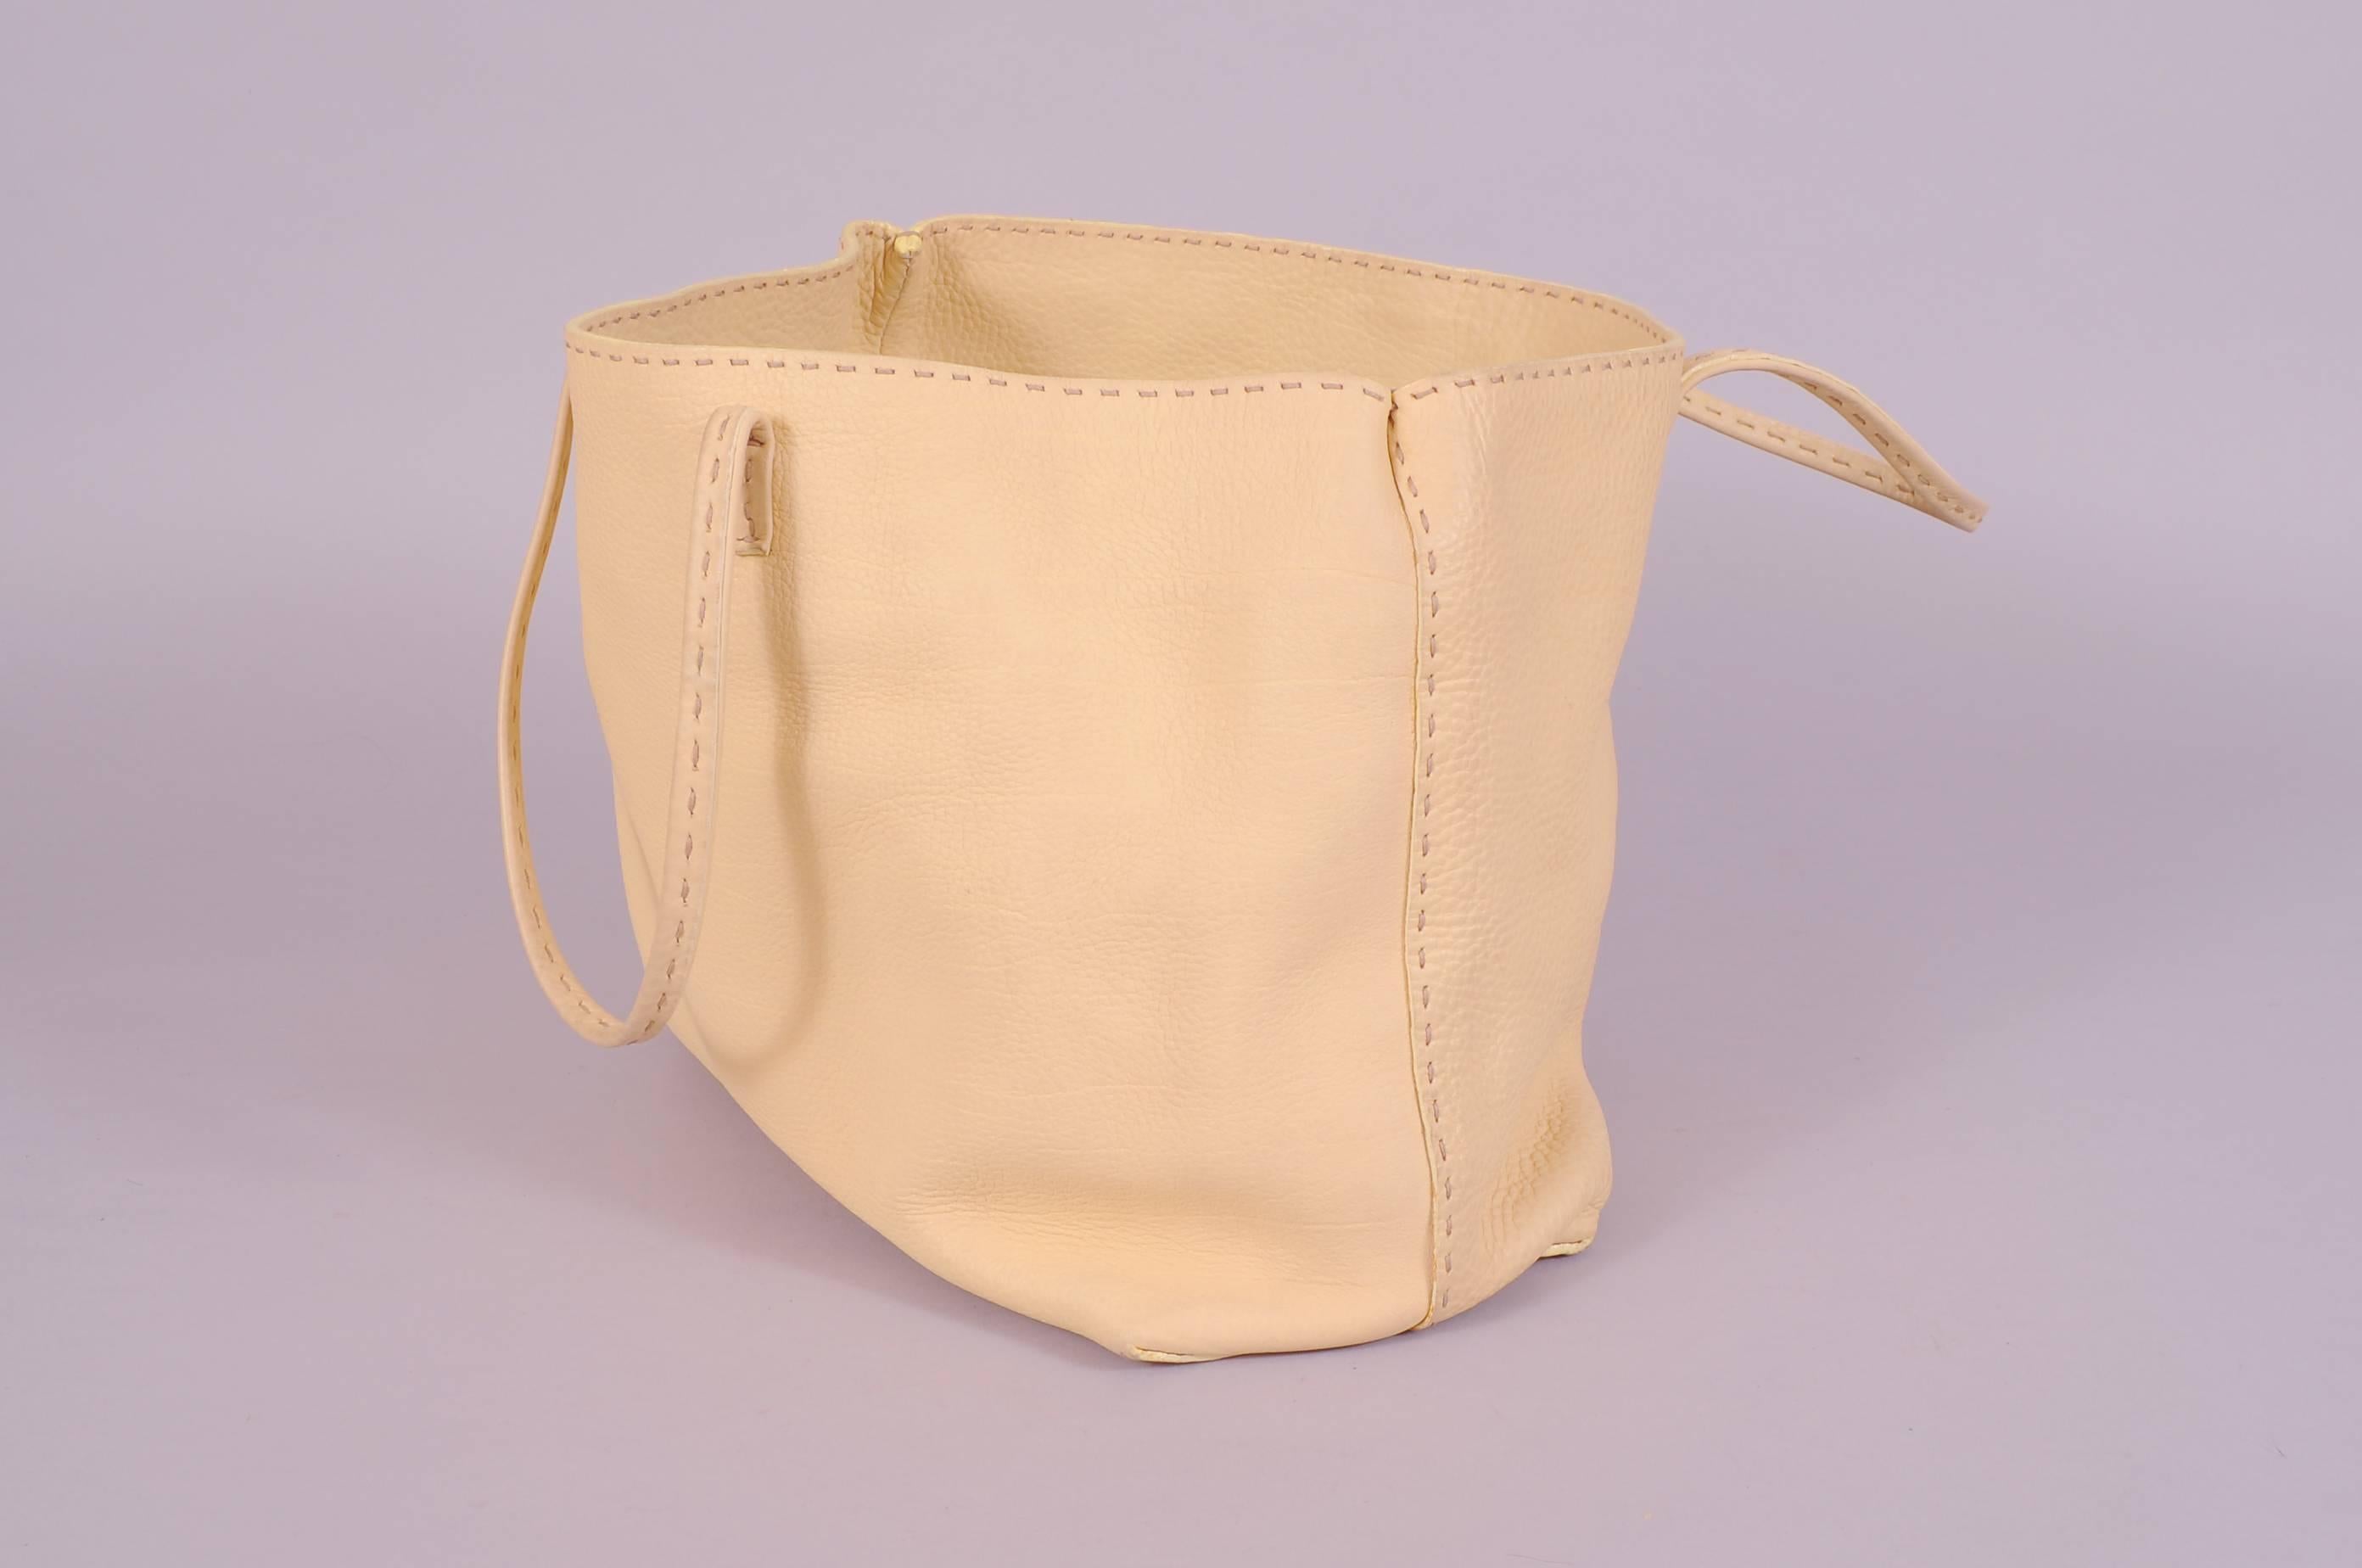 Pale butter yellow leather is used for this hand made tote. The straps and seams are finished with hand stitching in a natural color thread. The interior of the bag is a slightly darker yellow suede and there is one slip pocket and a metal plaque